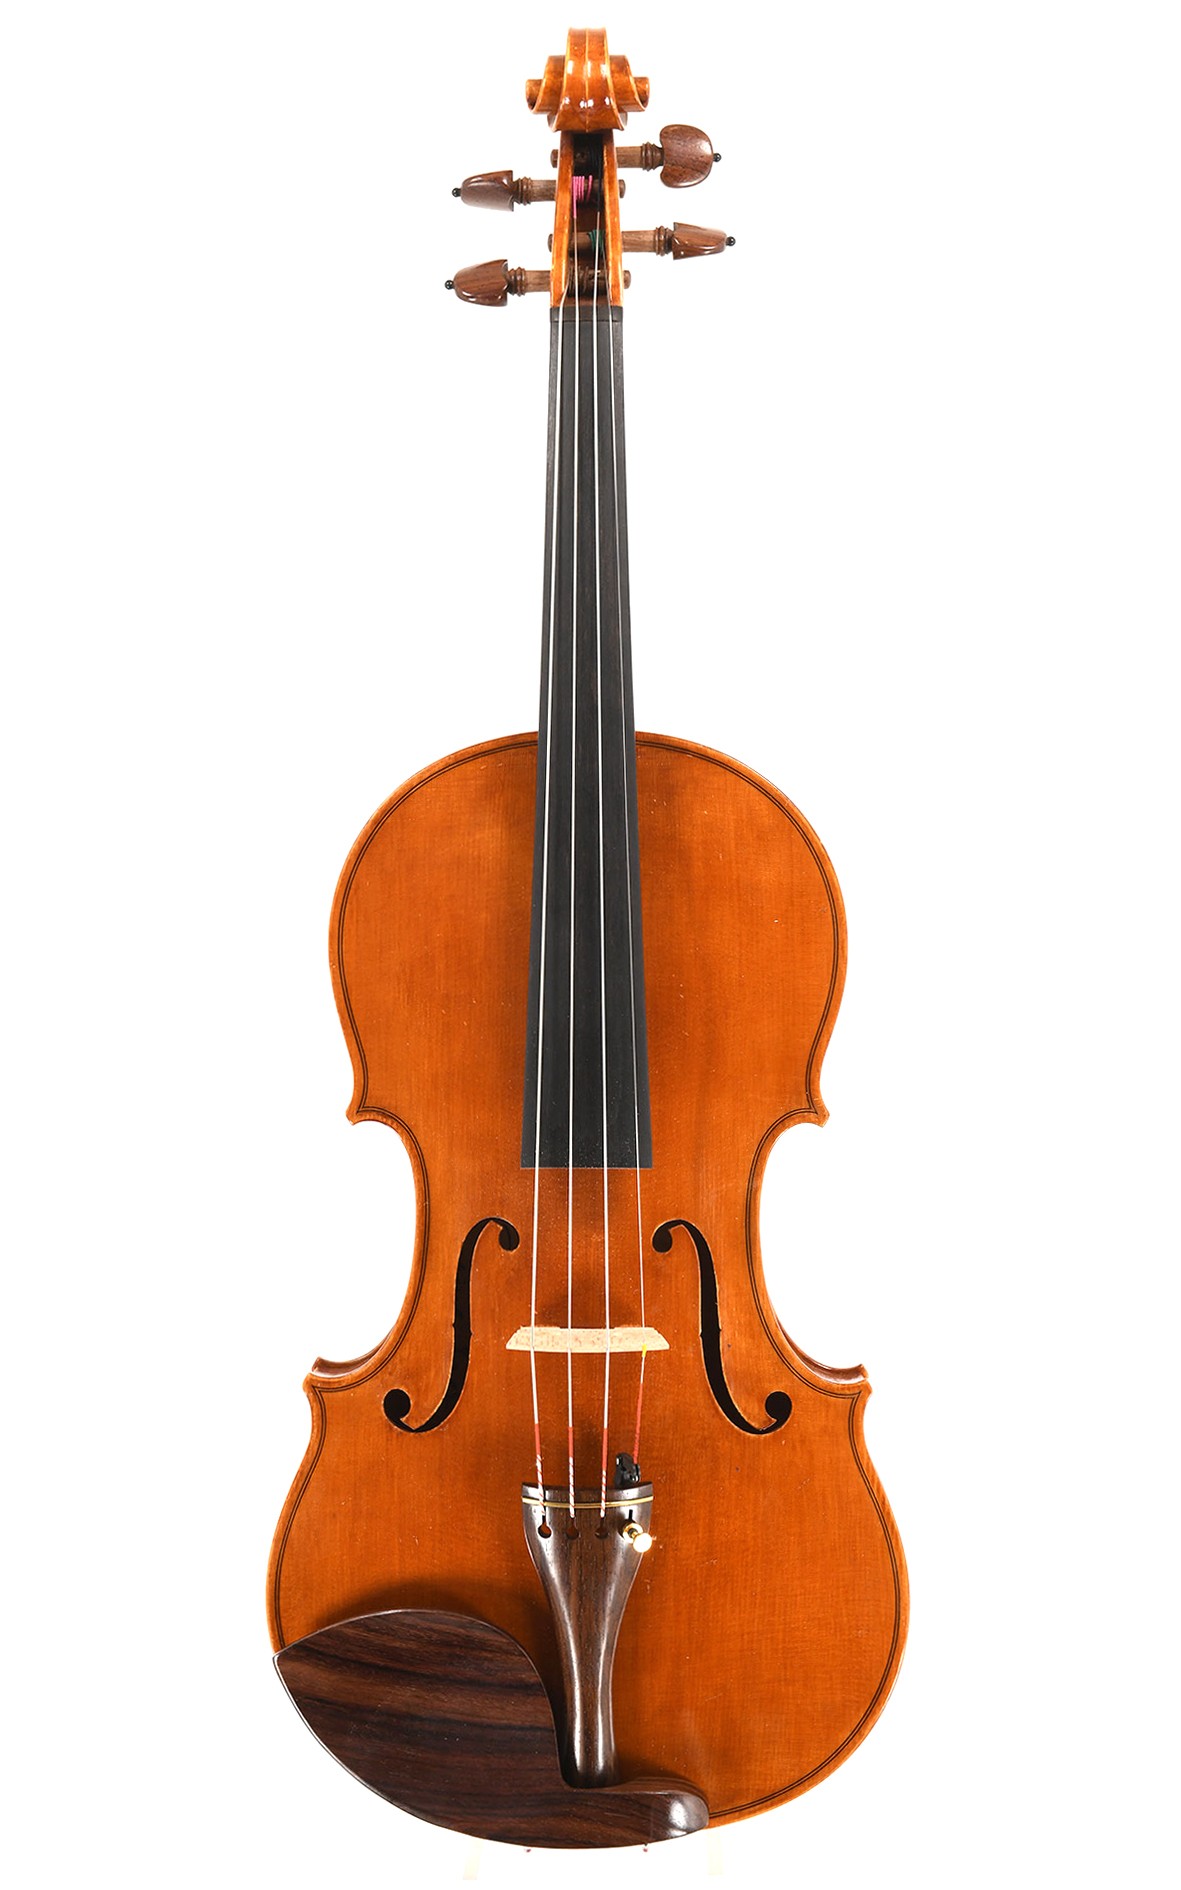 Fabulous German master violin made by Roland Hodapp in 1987